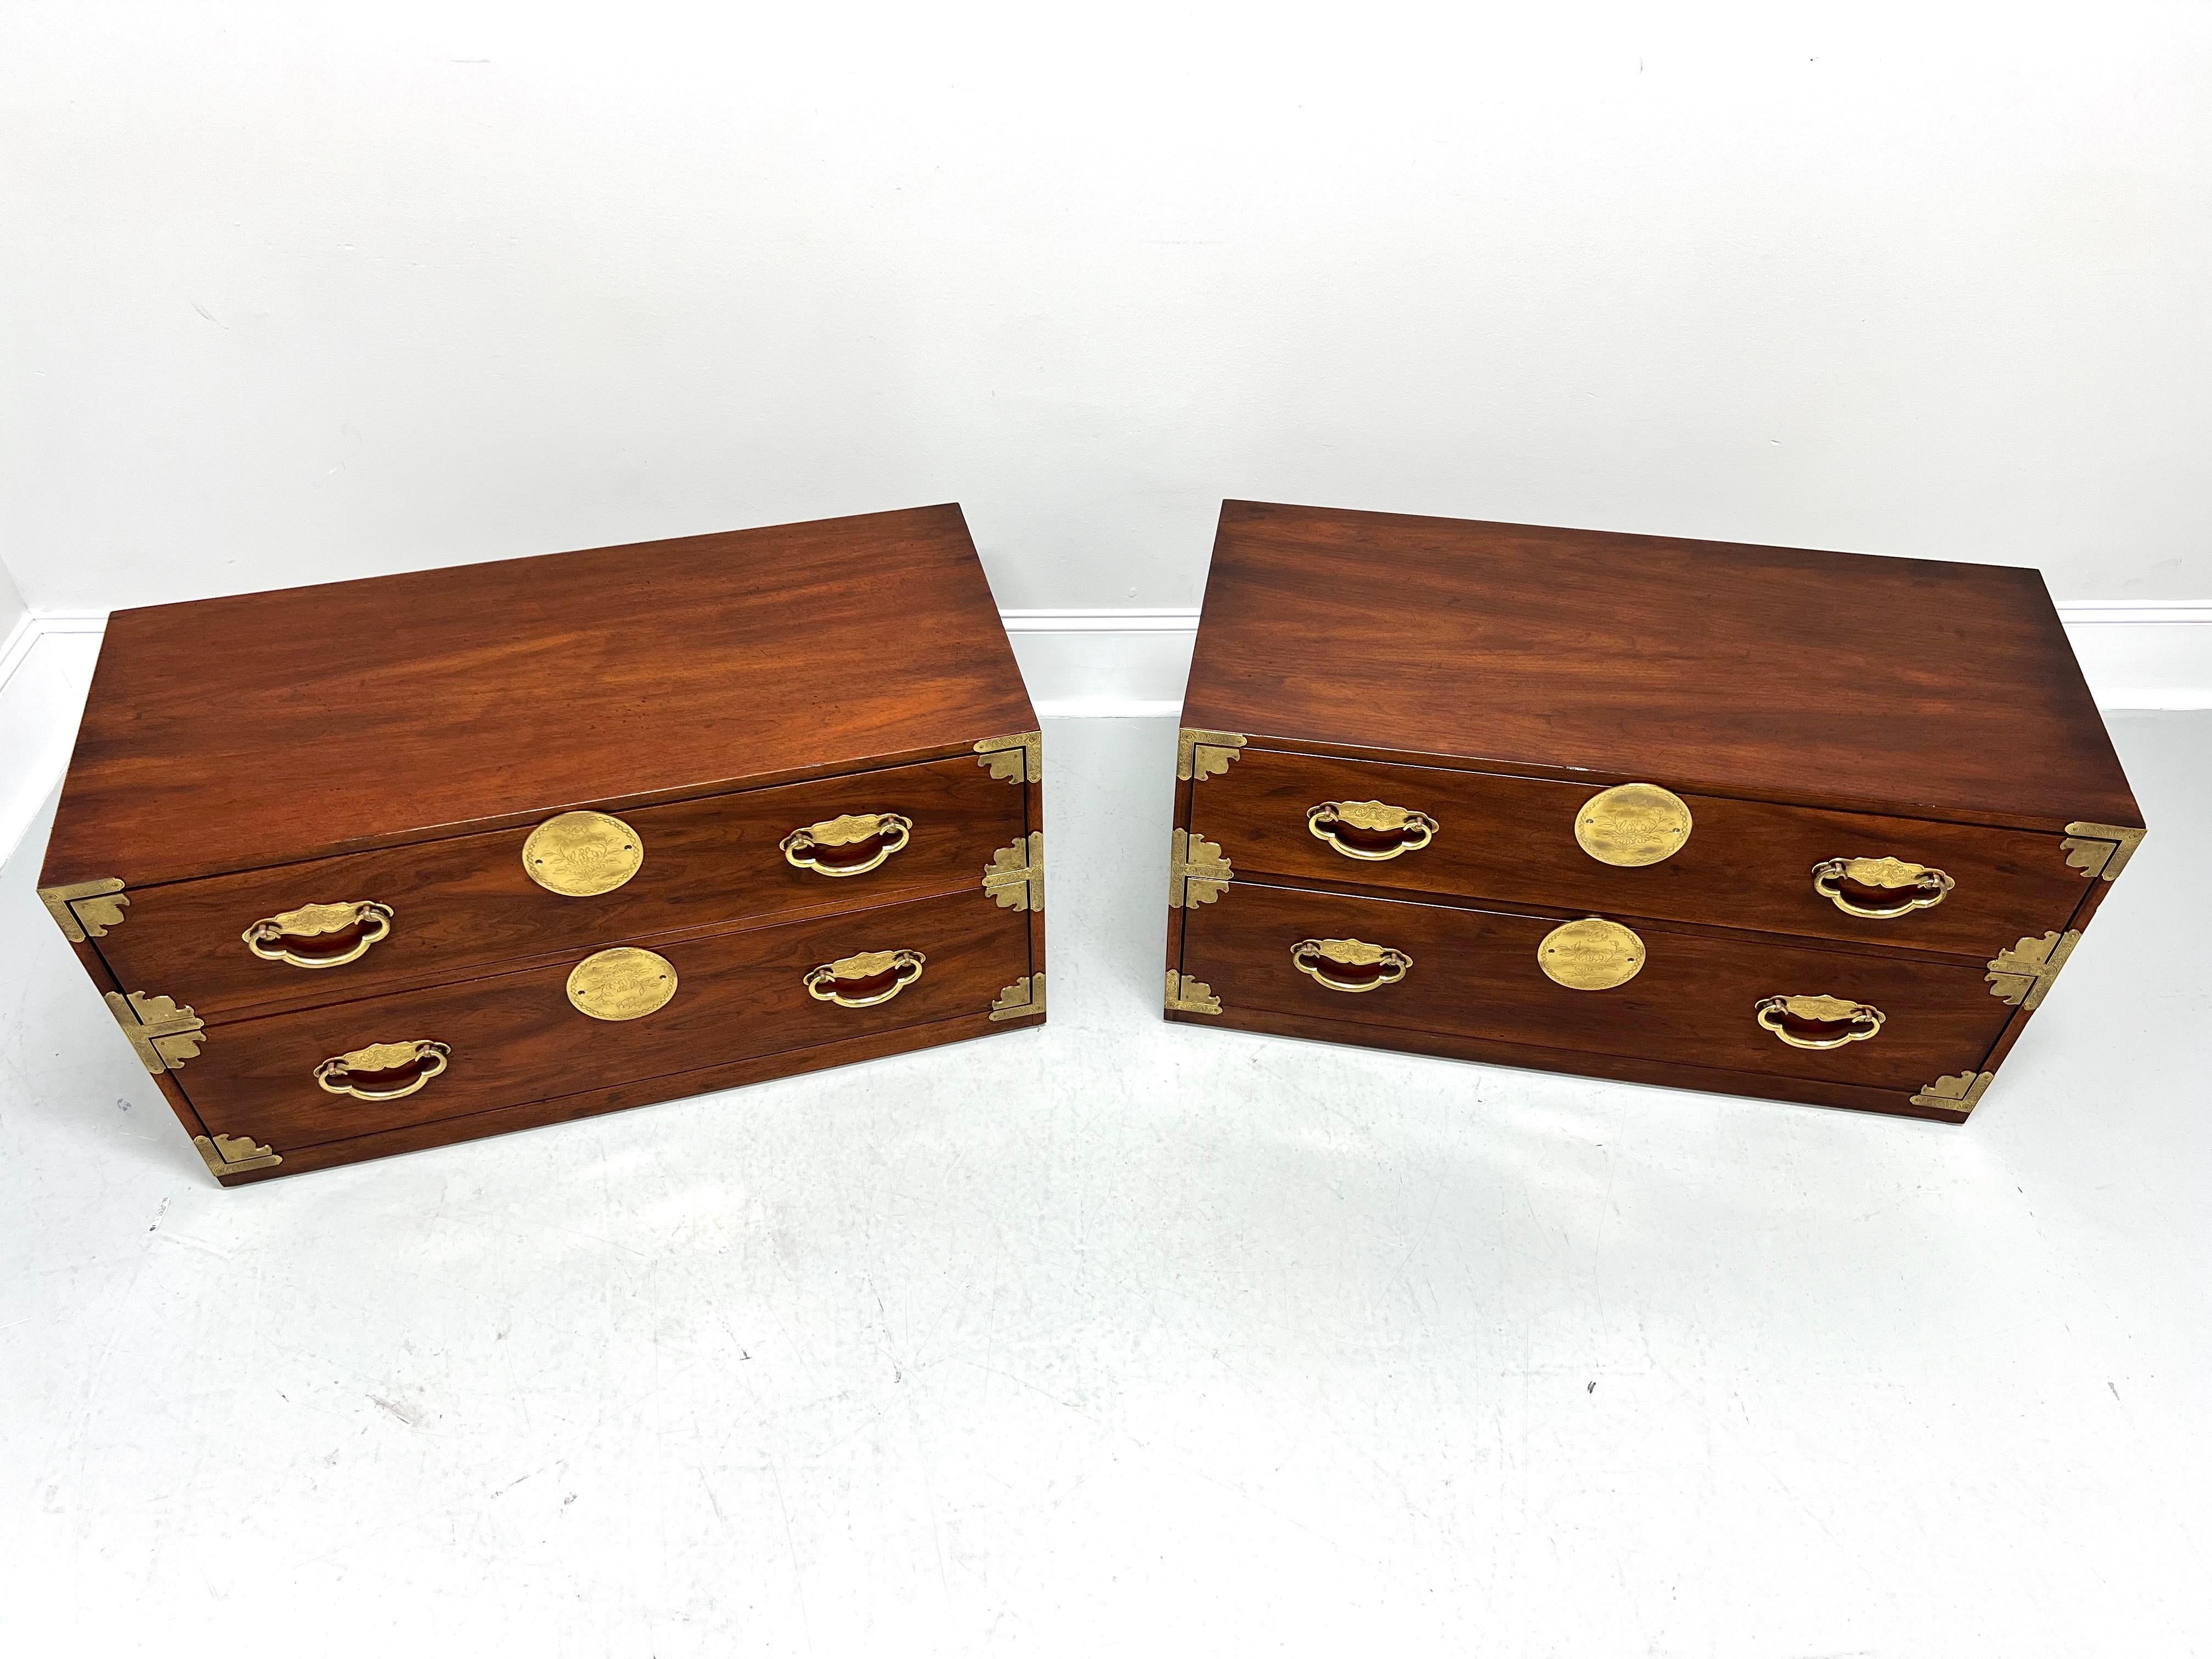 HENREDON Asian Japanese Tansu Campaign Style Modular Stackable Chests - Pair B For Sale 1